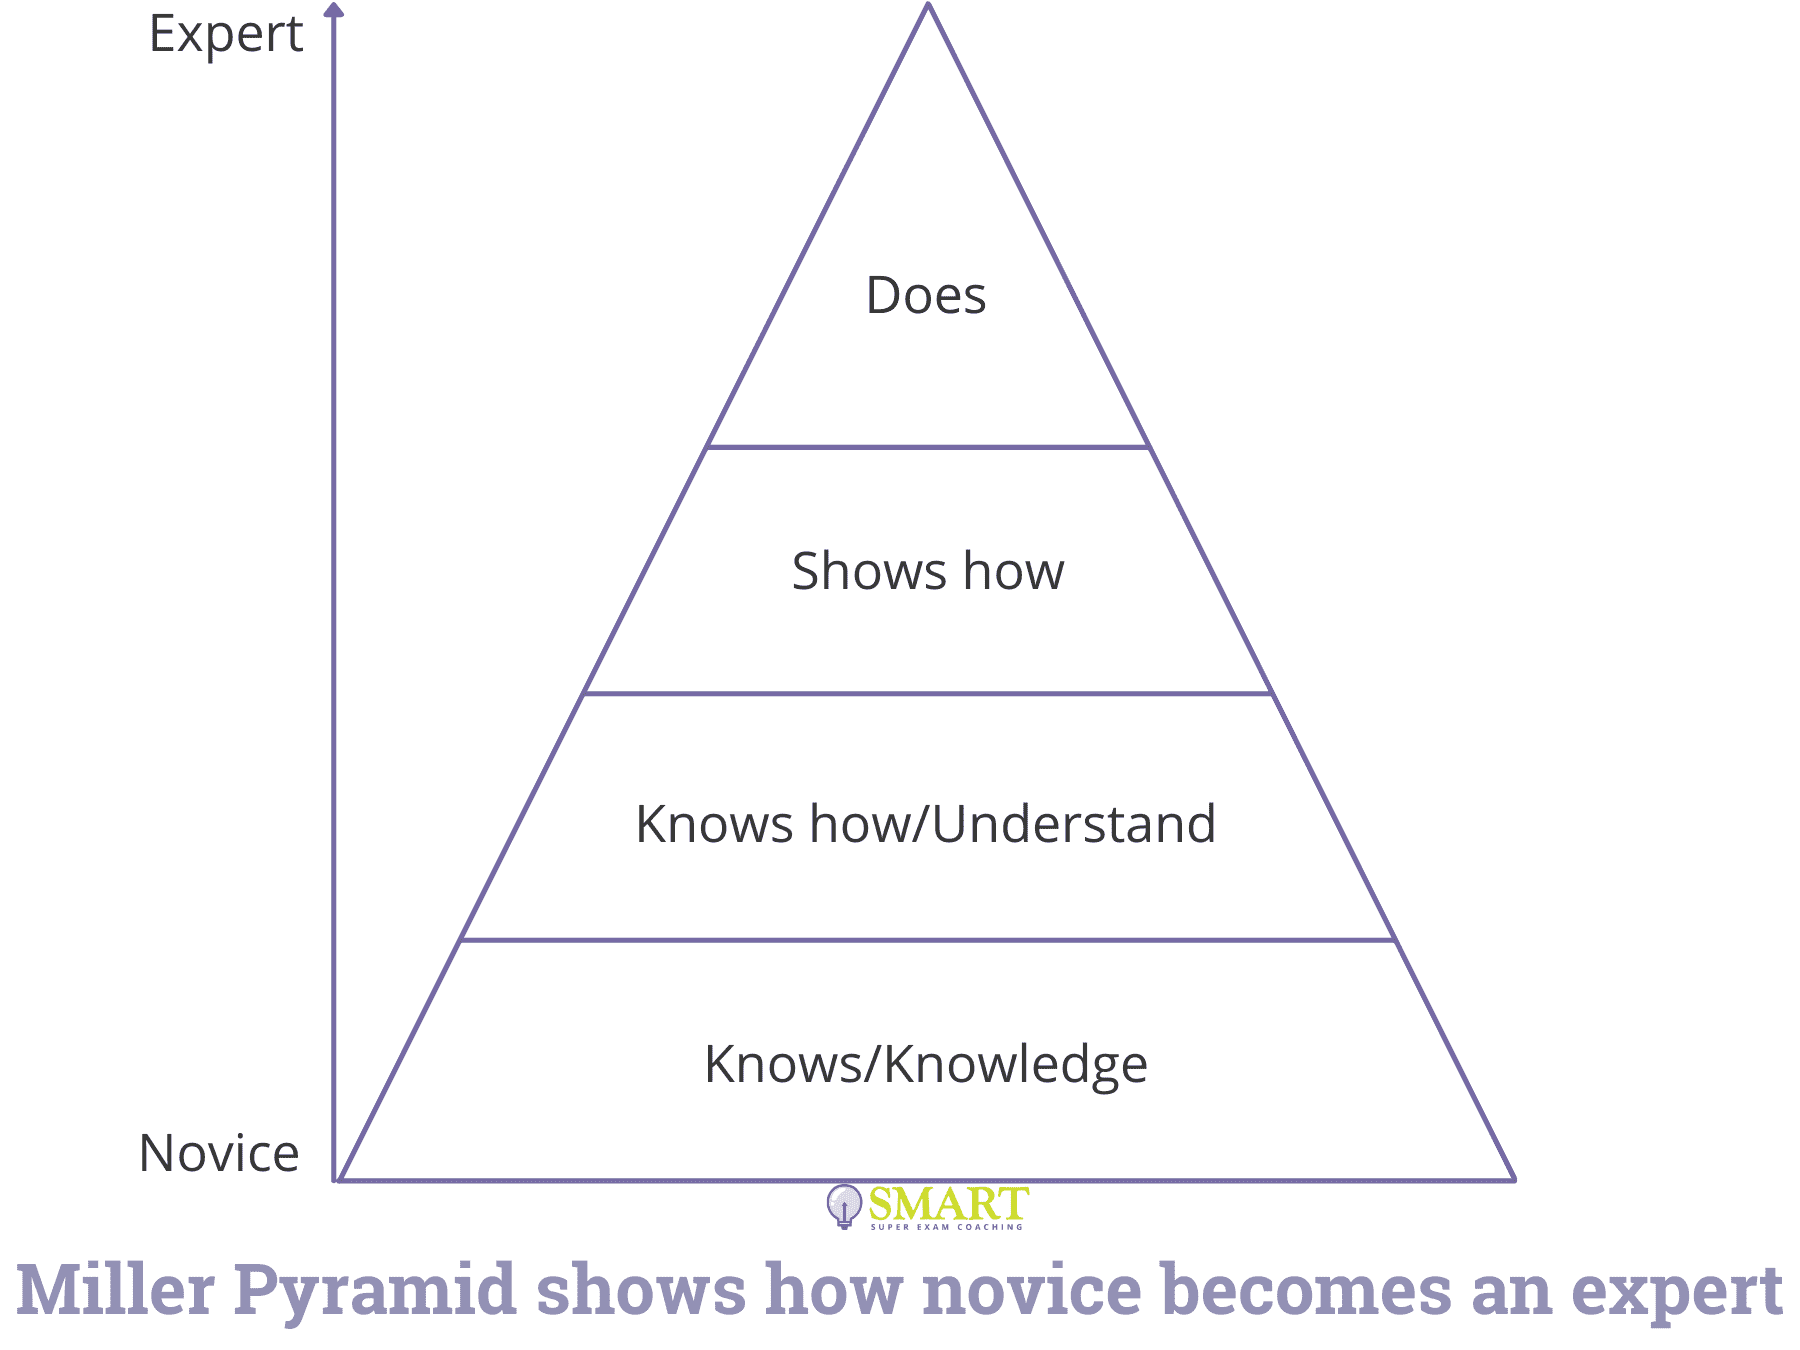 Miller Pyramid shows how novice becomes an expert